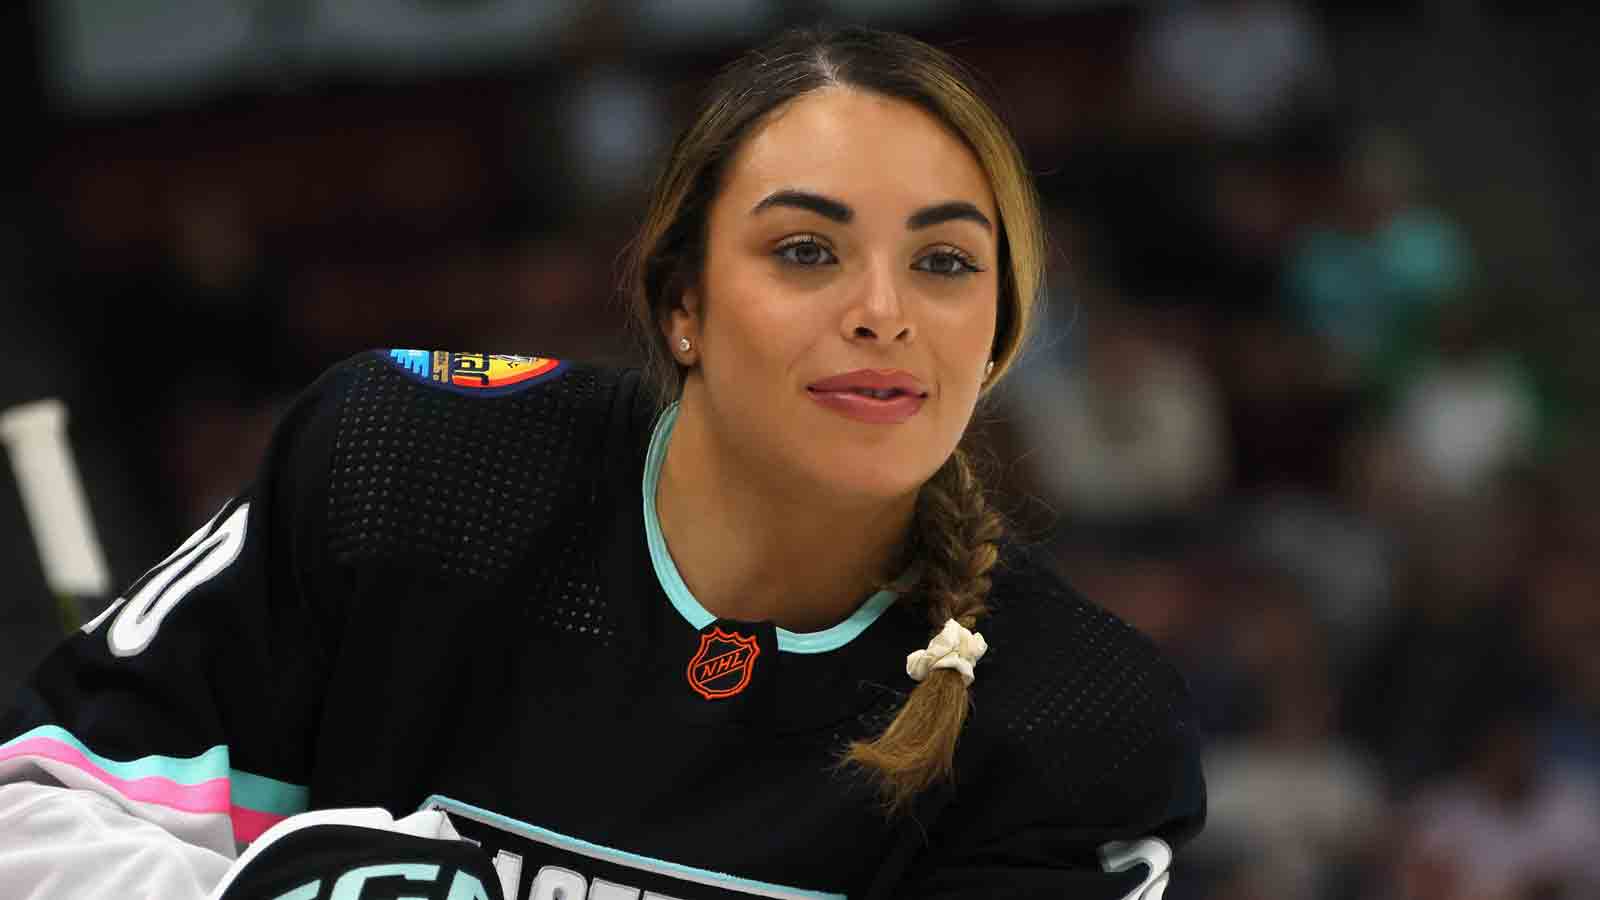 Florida Panthers offer Canada's Sarah Nurse deal to lead girls